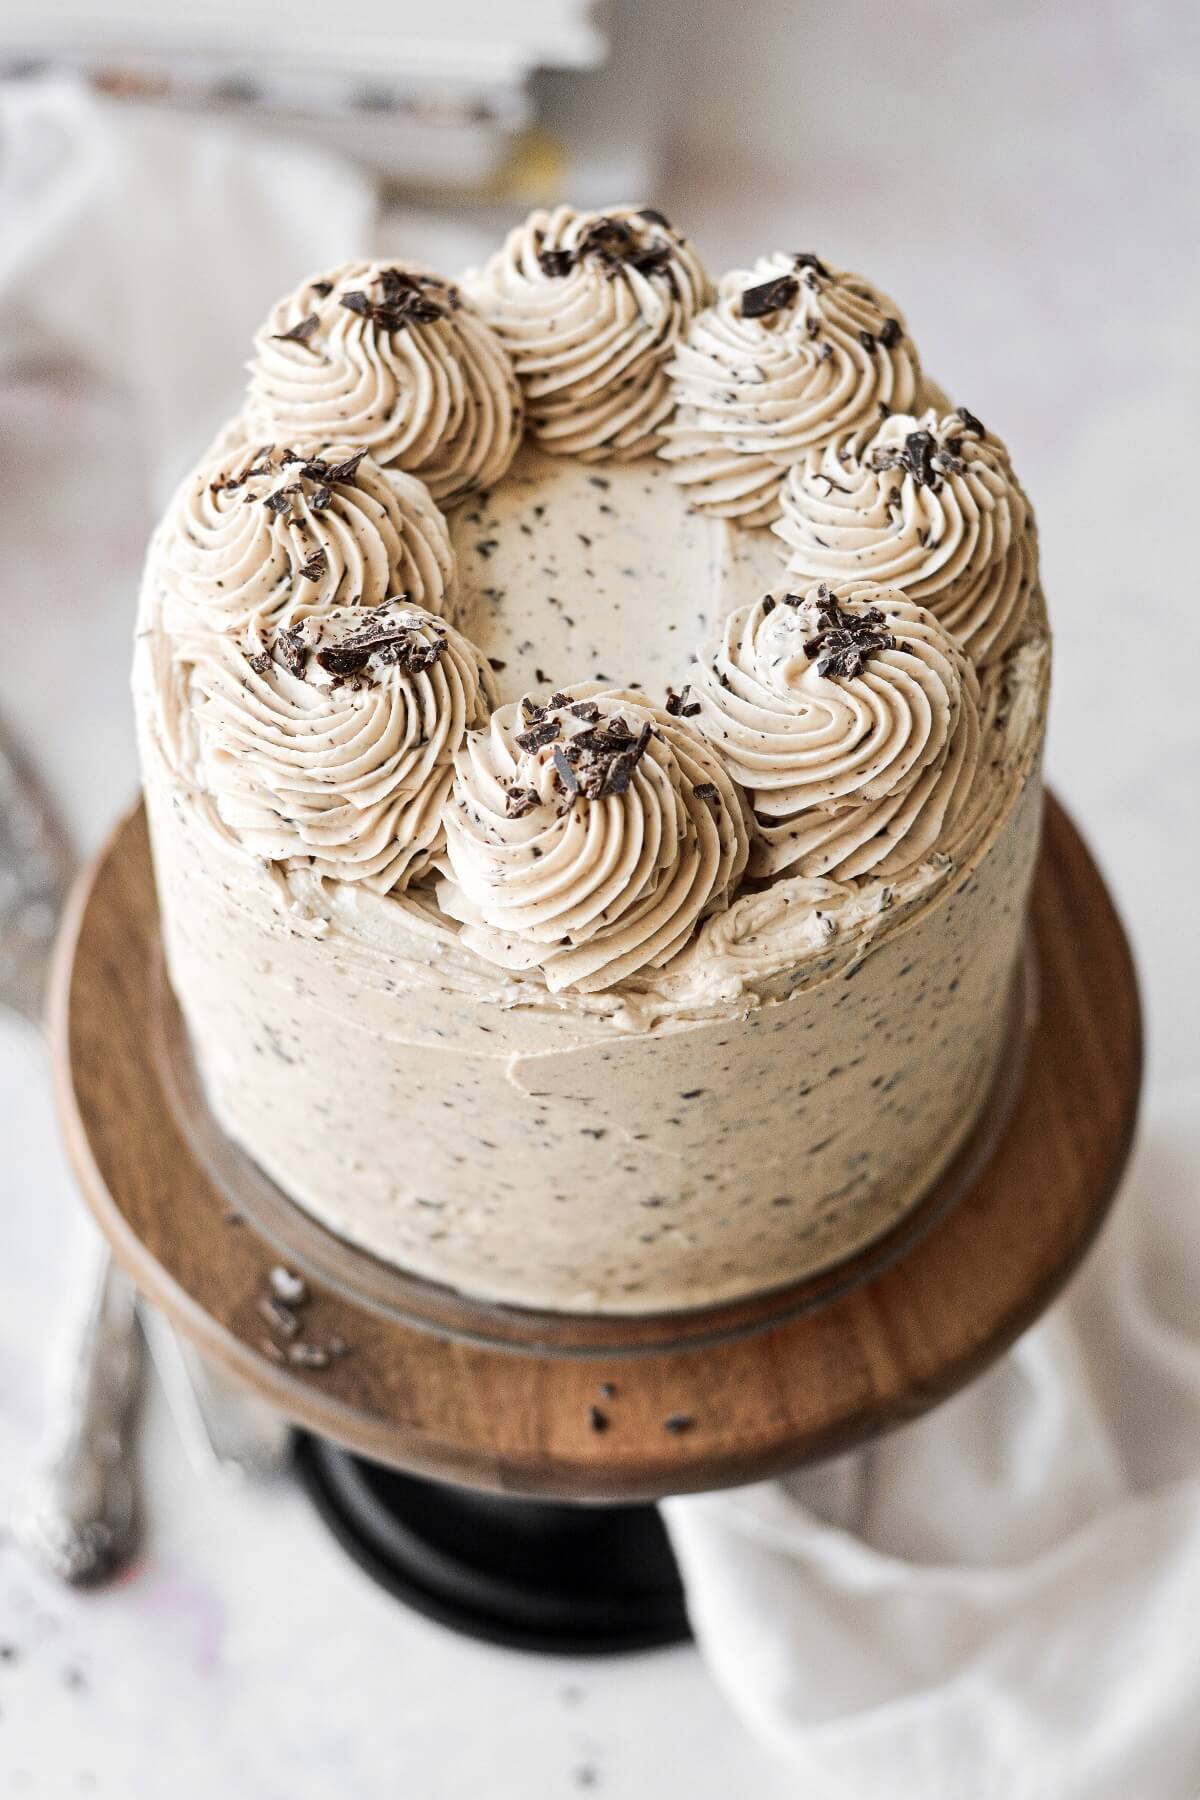 Chocolate peanut butter cake topped with swirls of frosting and chopped chocolate.